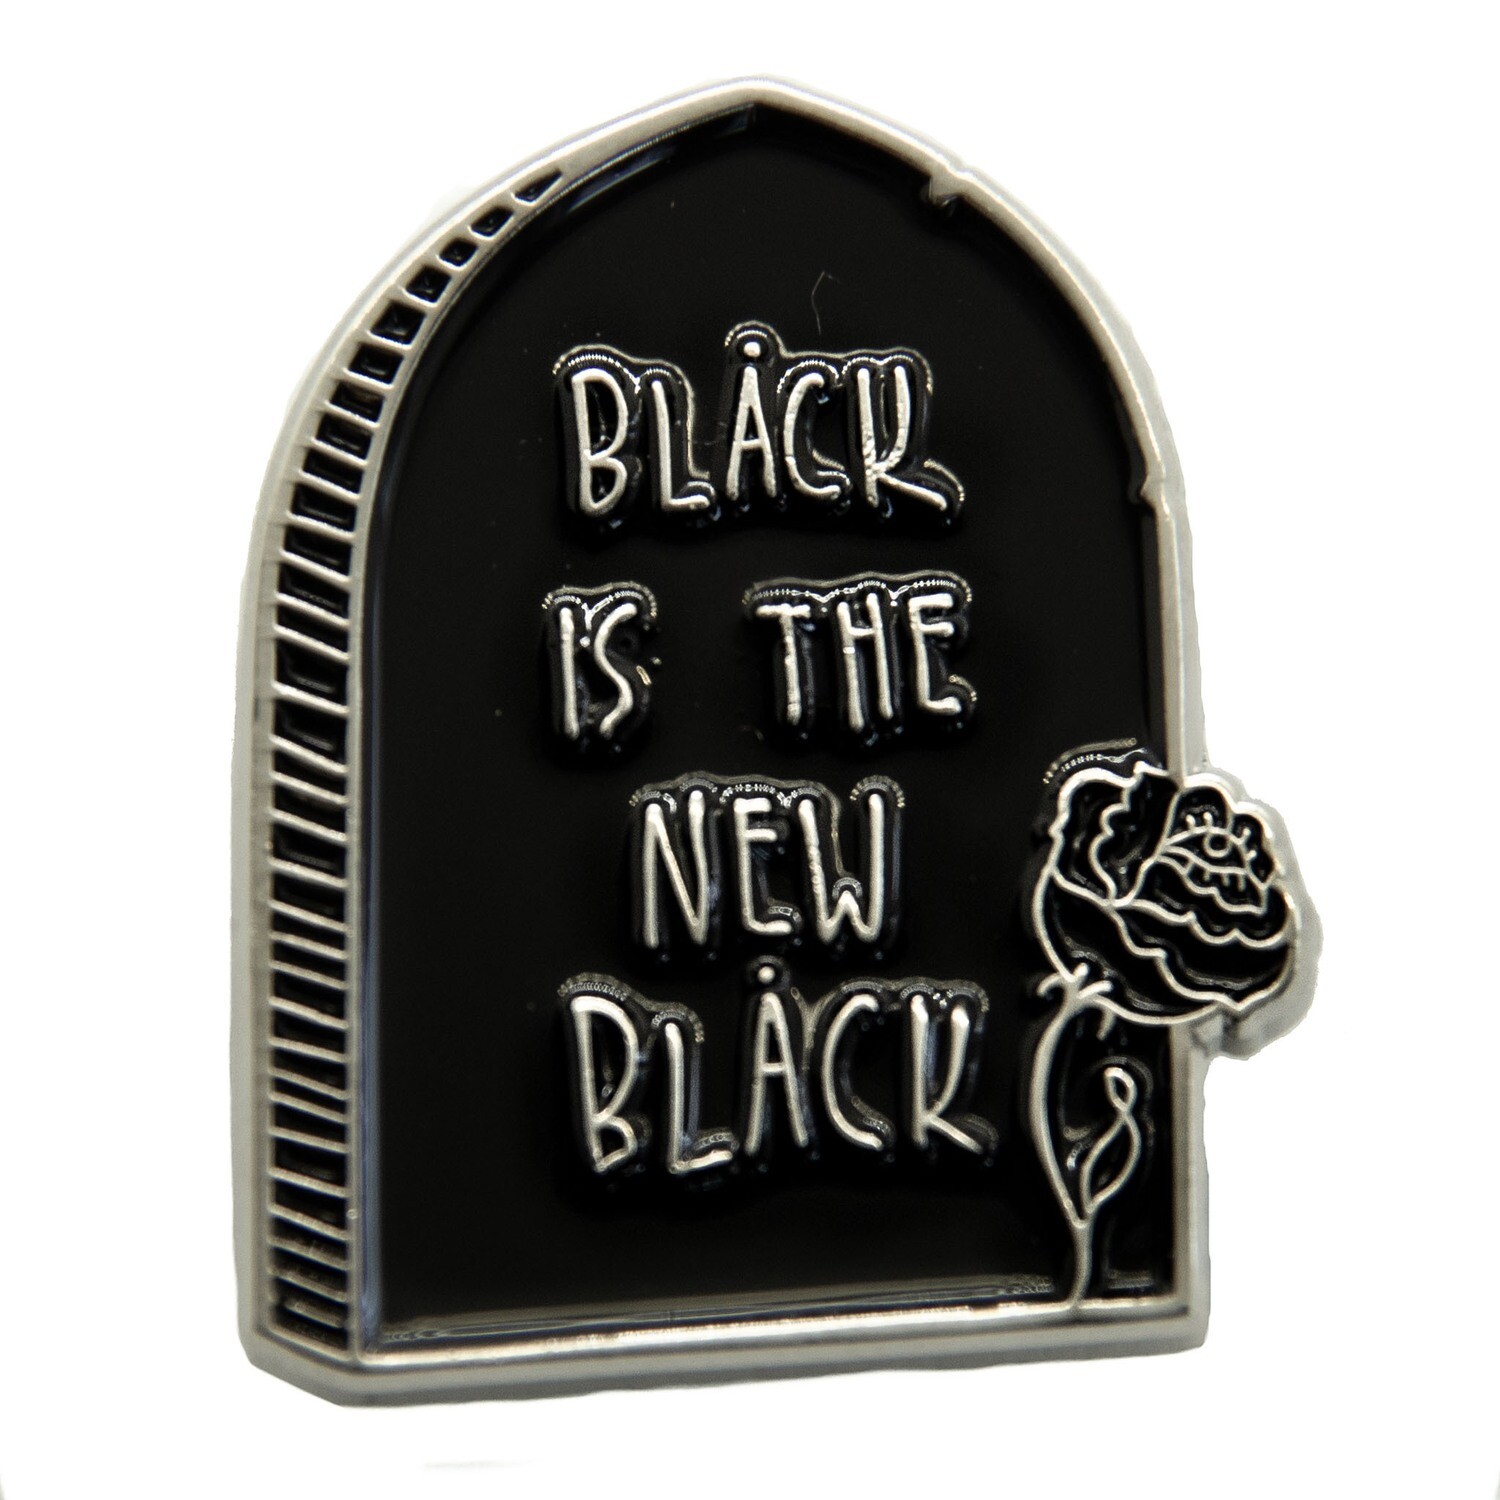 "Black Is The New Black" Headstone Pin